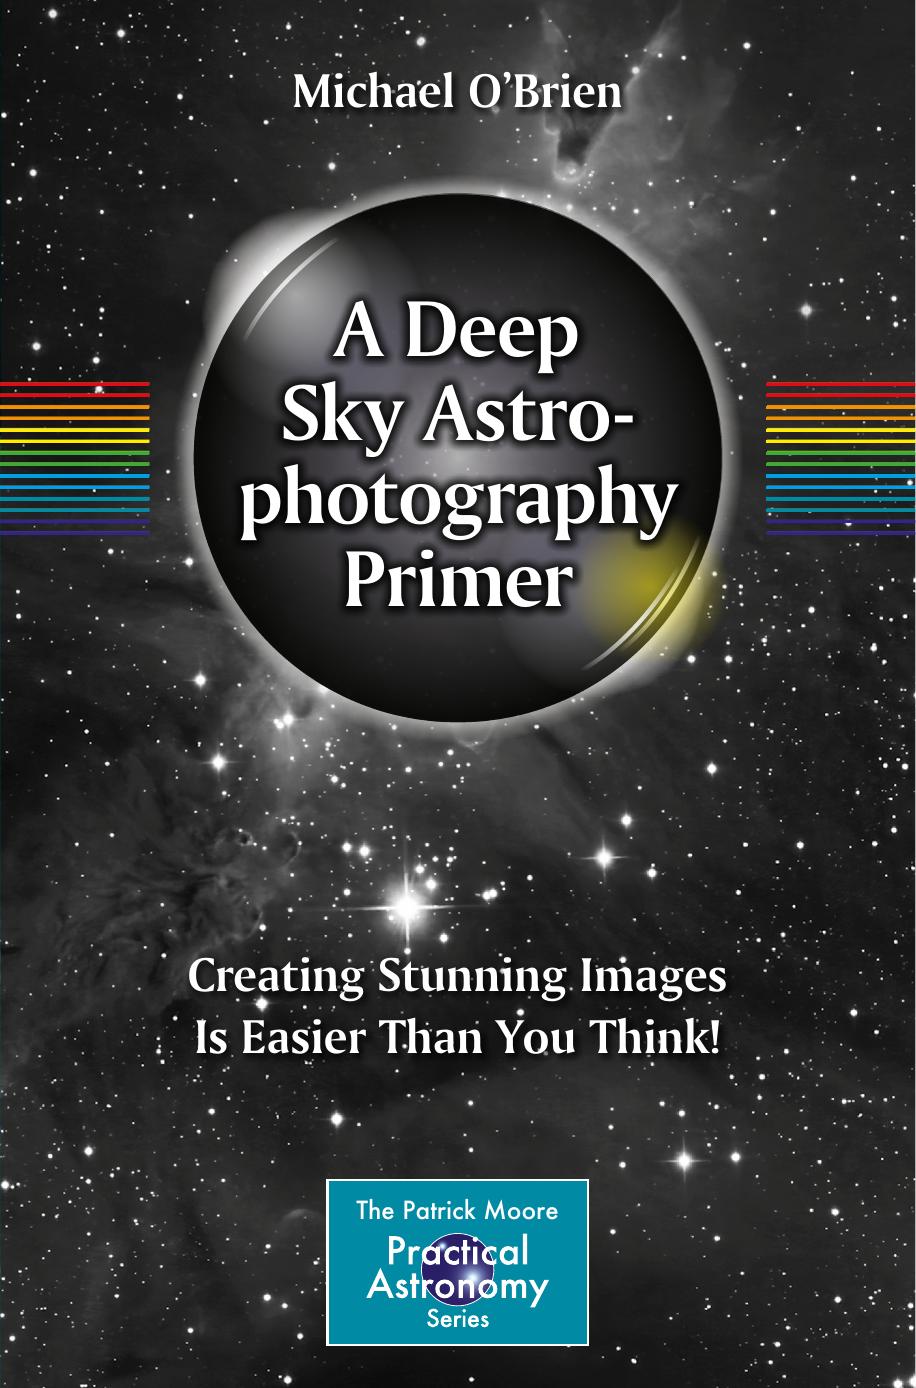 A Deep Sky Astrophotography Primer: Creating Stunning Images Is Easier Than You Think! by Michael O'Brien